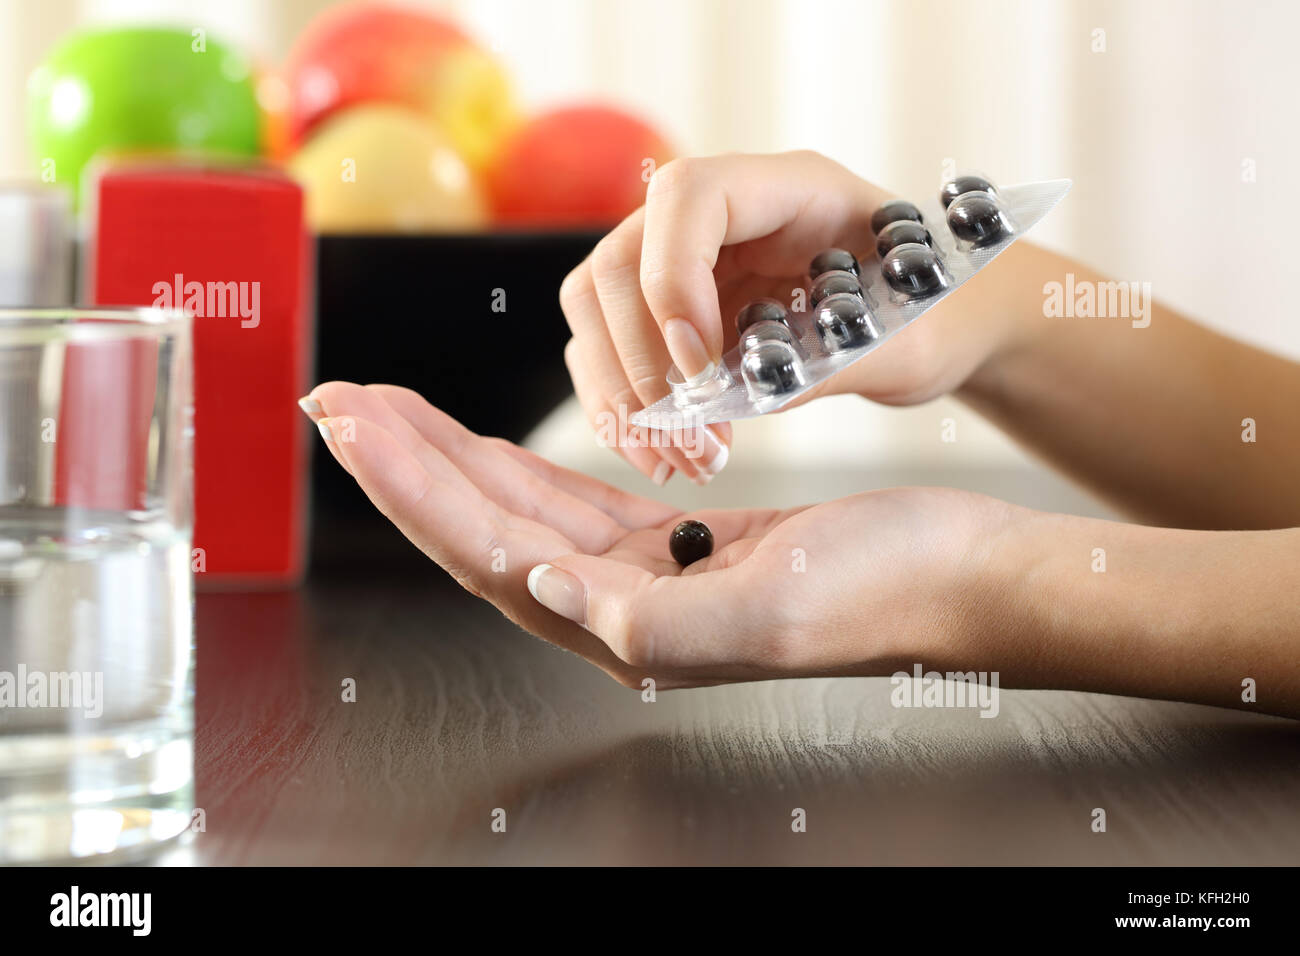 Close up of a woman hands getting a vitamin complex pill from a container Stock Photo